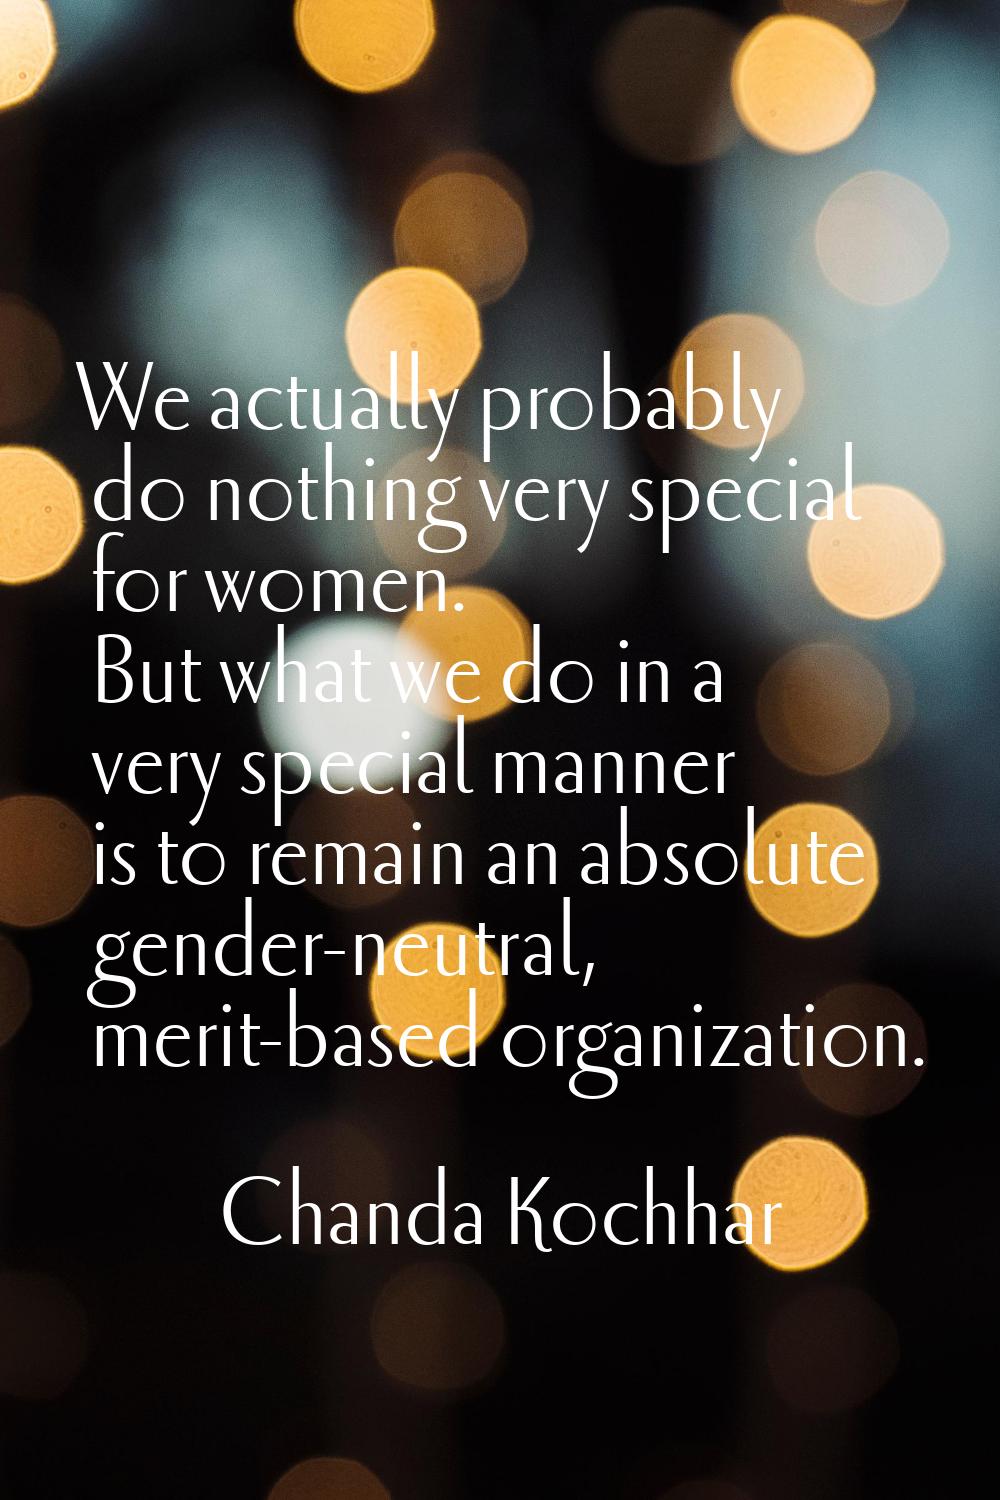 We actually probably do nothing very special for women. But what we do in a very special manner is 